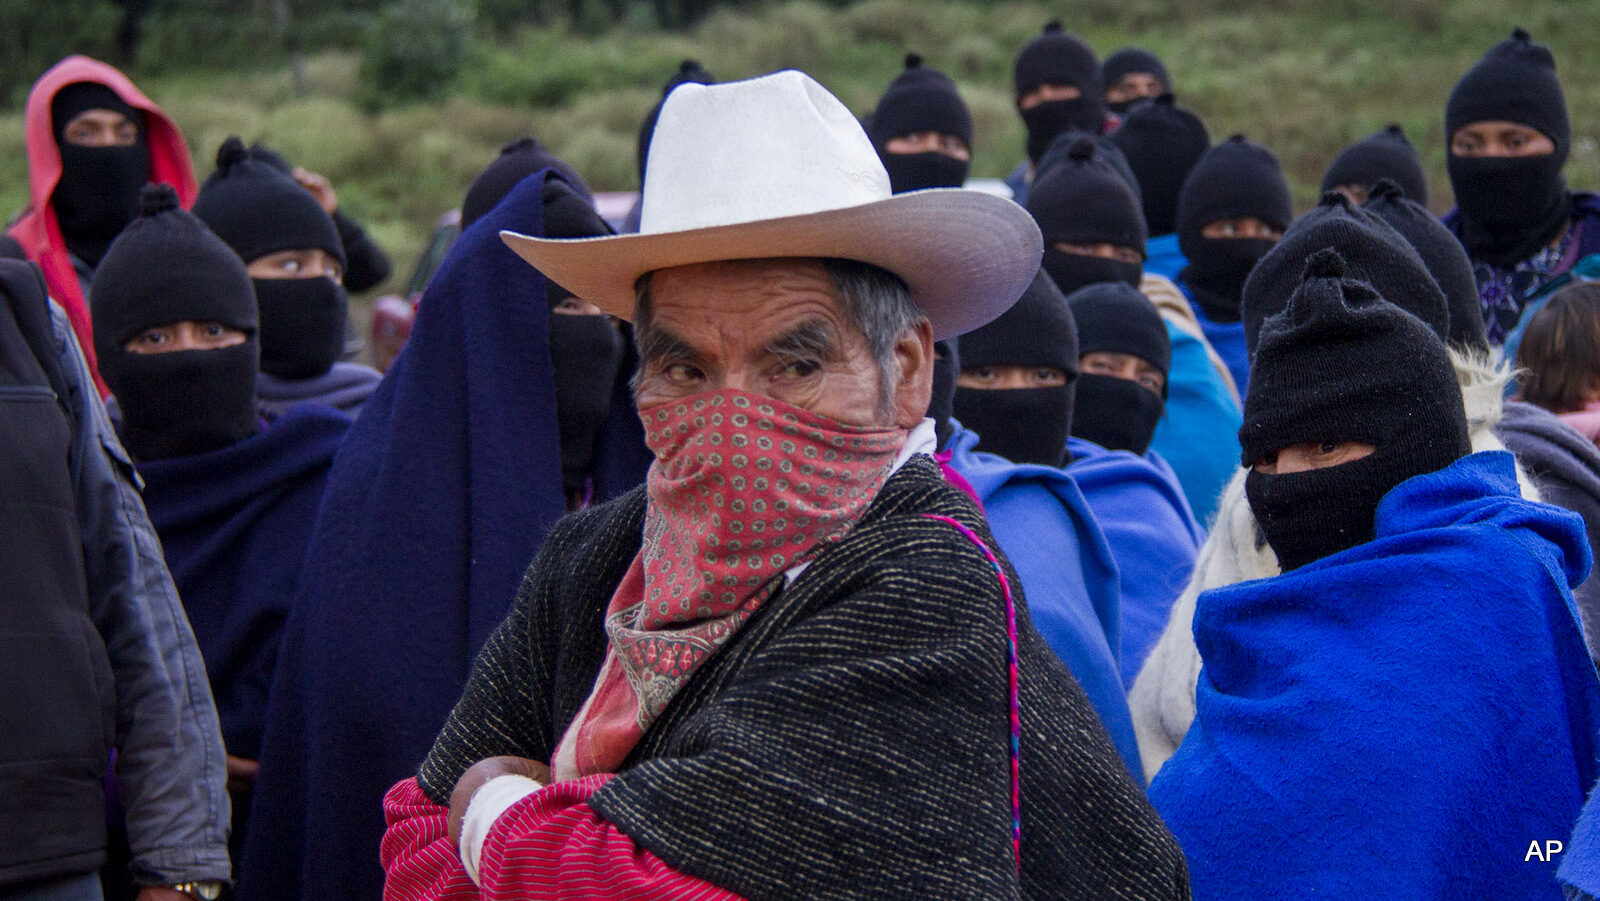 Supporters of the Zapatista National Liberation Army (EZLN) stand during a protest in support of the 43 disappeared Mexican rural college students, at a main road near San Cristobal de las Casas, Mexico, Wednesday Oct. 22, 2014.